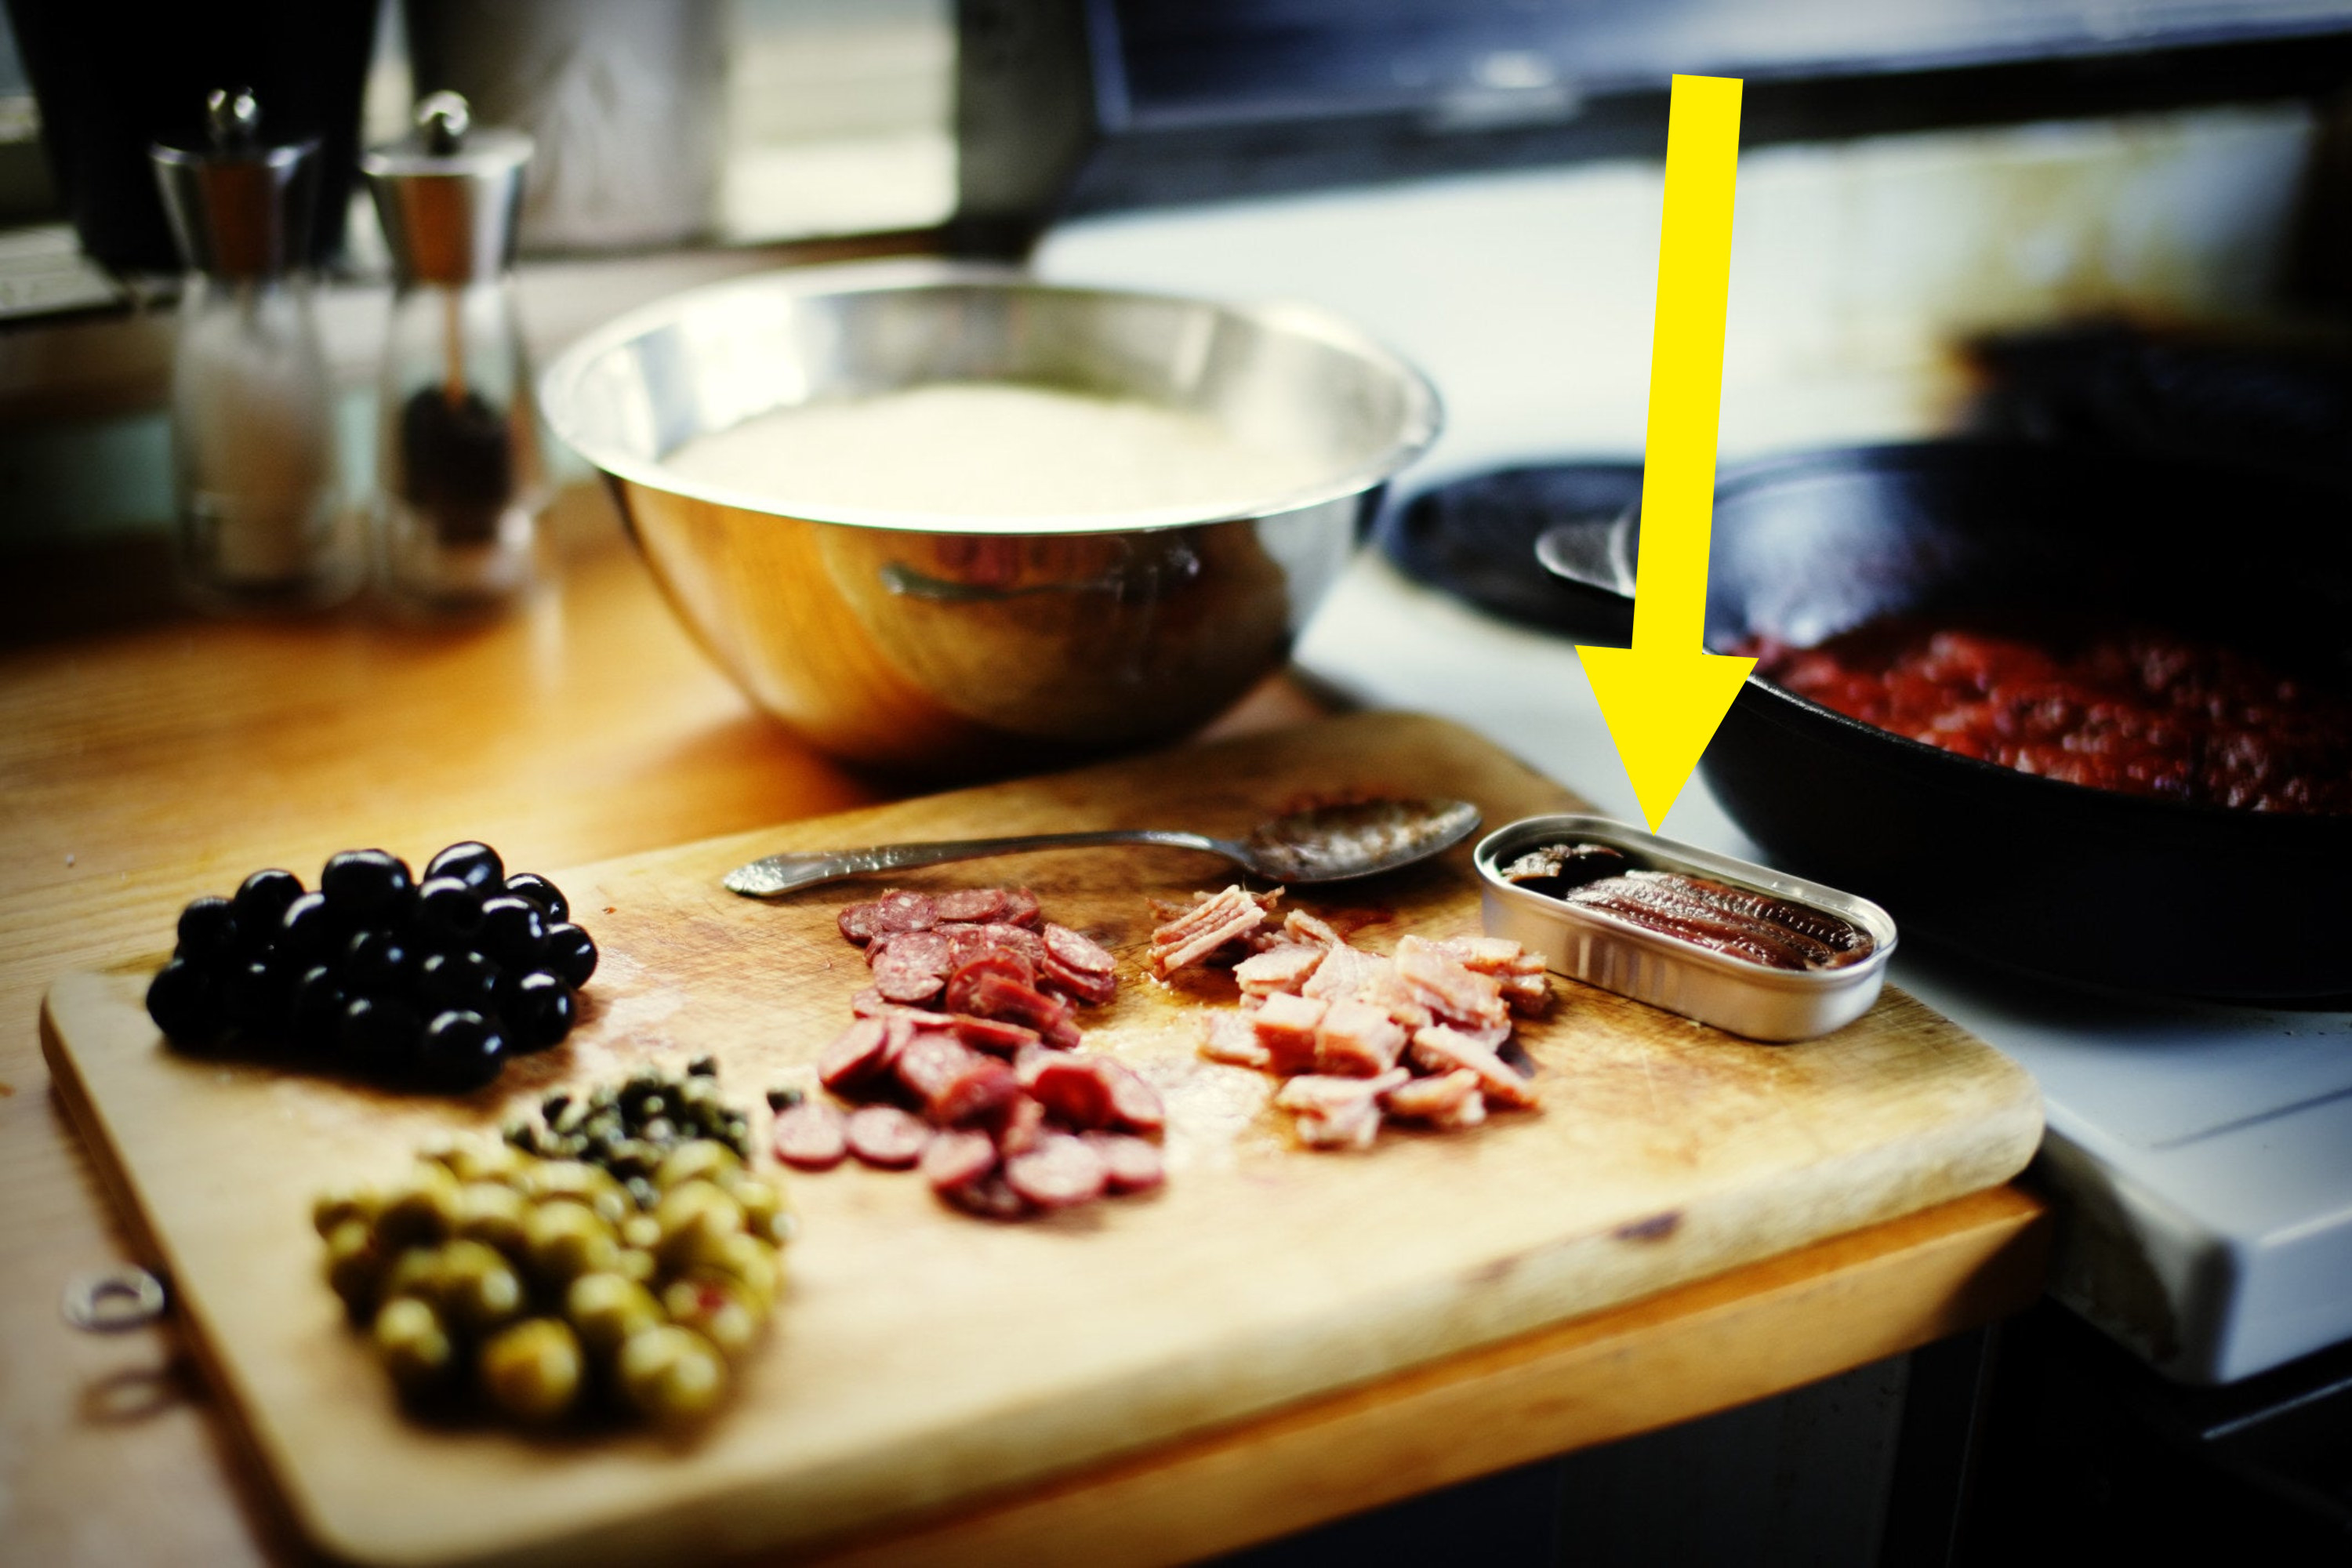 Ingredients on. a cutting board including olives, pepperoni, and anchovies.